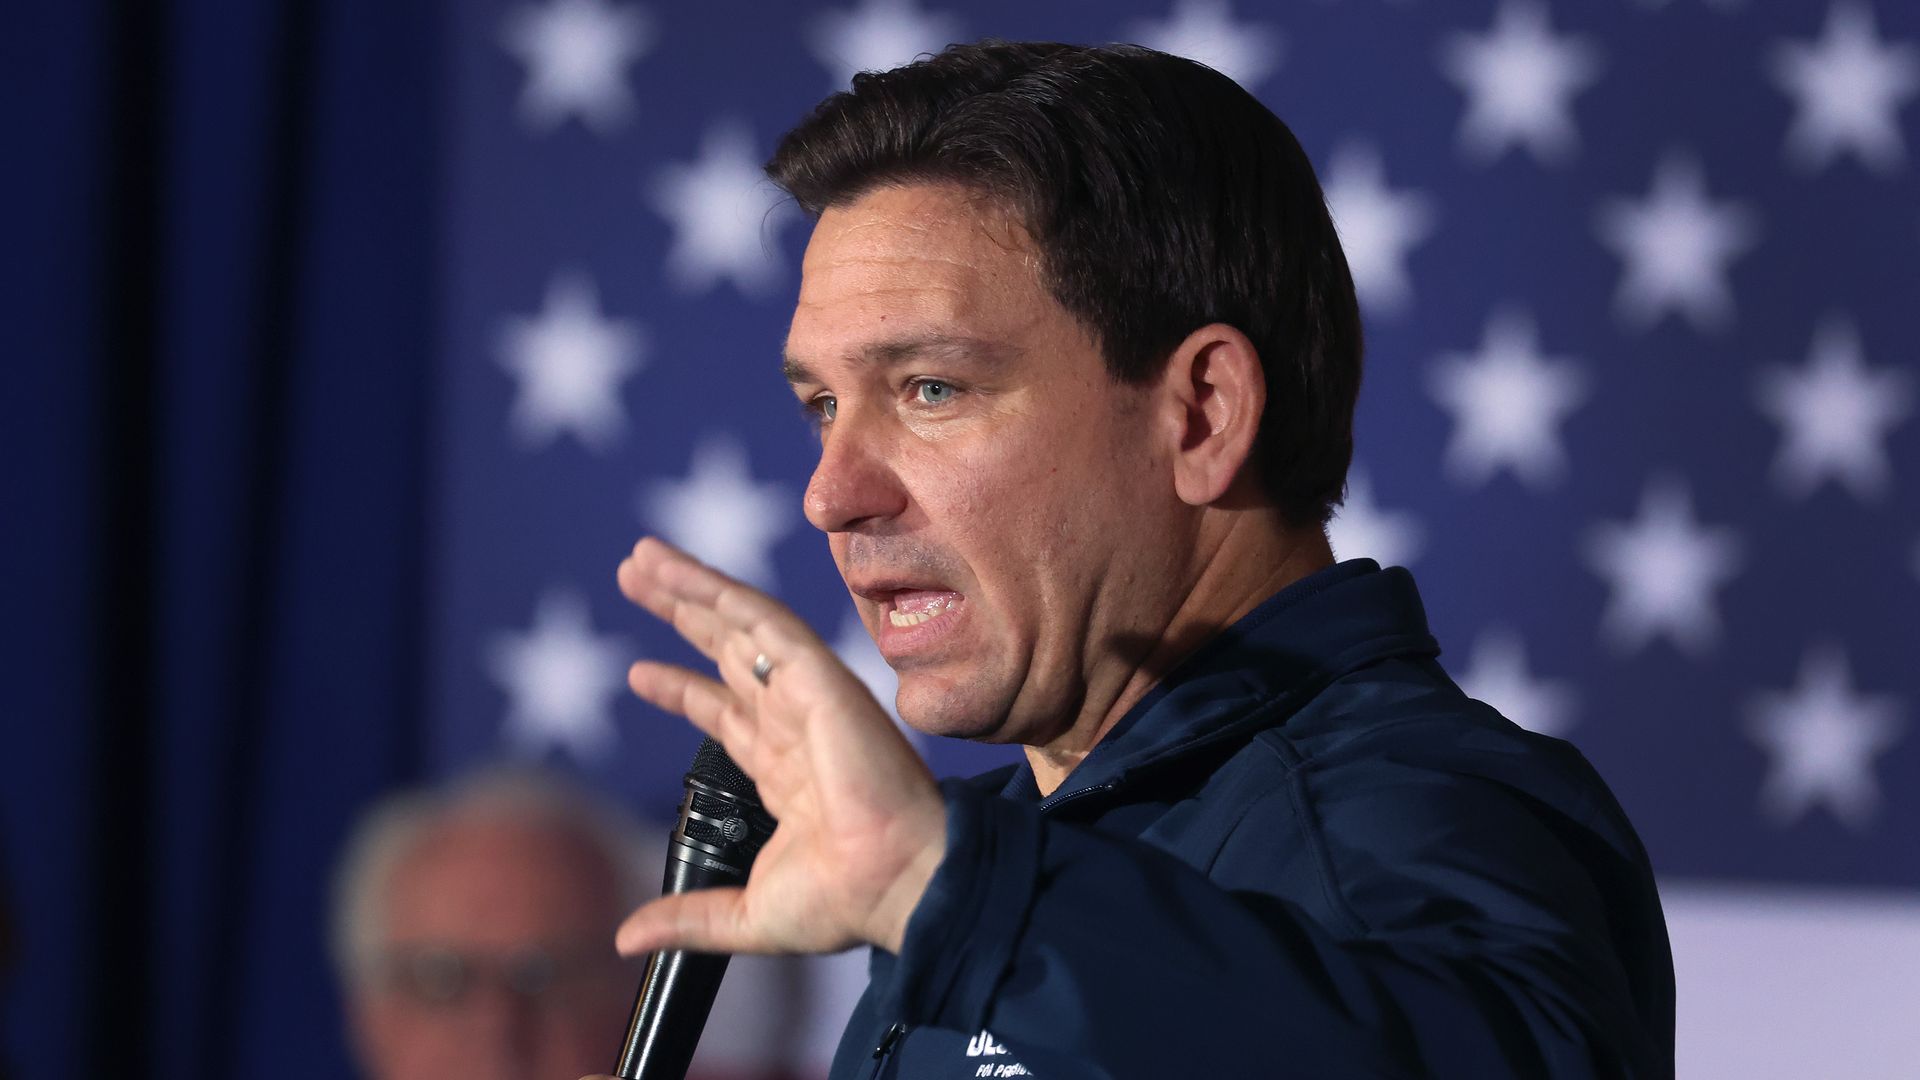 Republican presidential candidate Florida Governor Ron DeSantis speaks to guests during a campaign rally at the Thunderdome on December 02, 2023 in Newton, Iowa